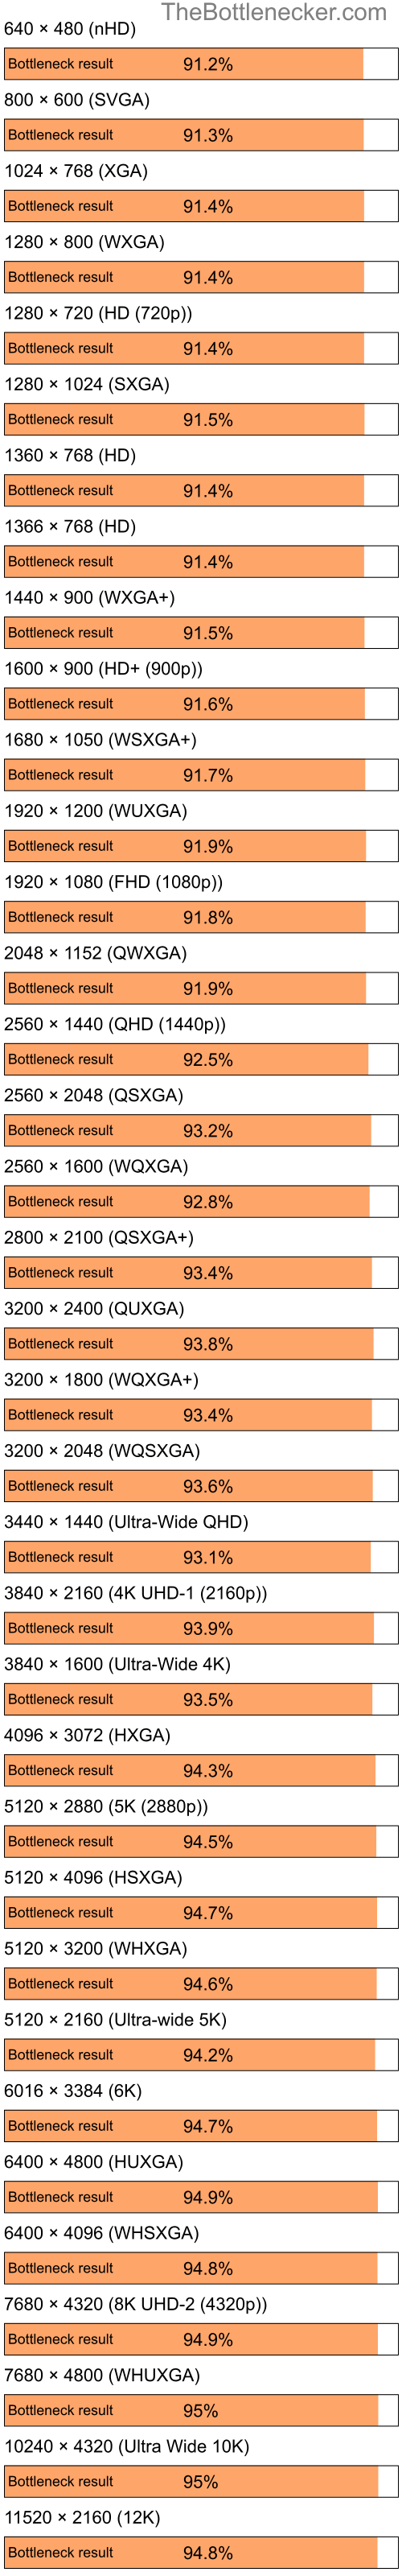 Bottleneck results by resolution for Intel Pentium 4 and AMD Radeon 9200 LE Family in General Tasks